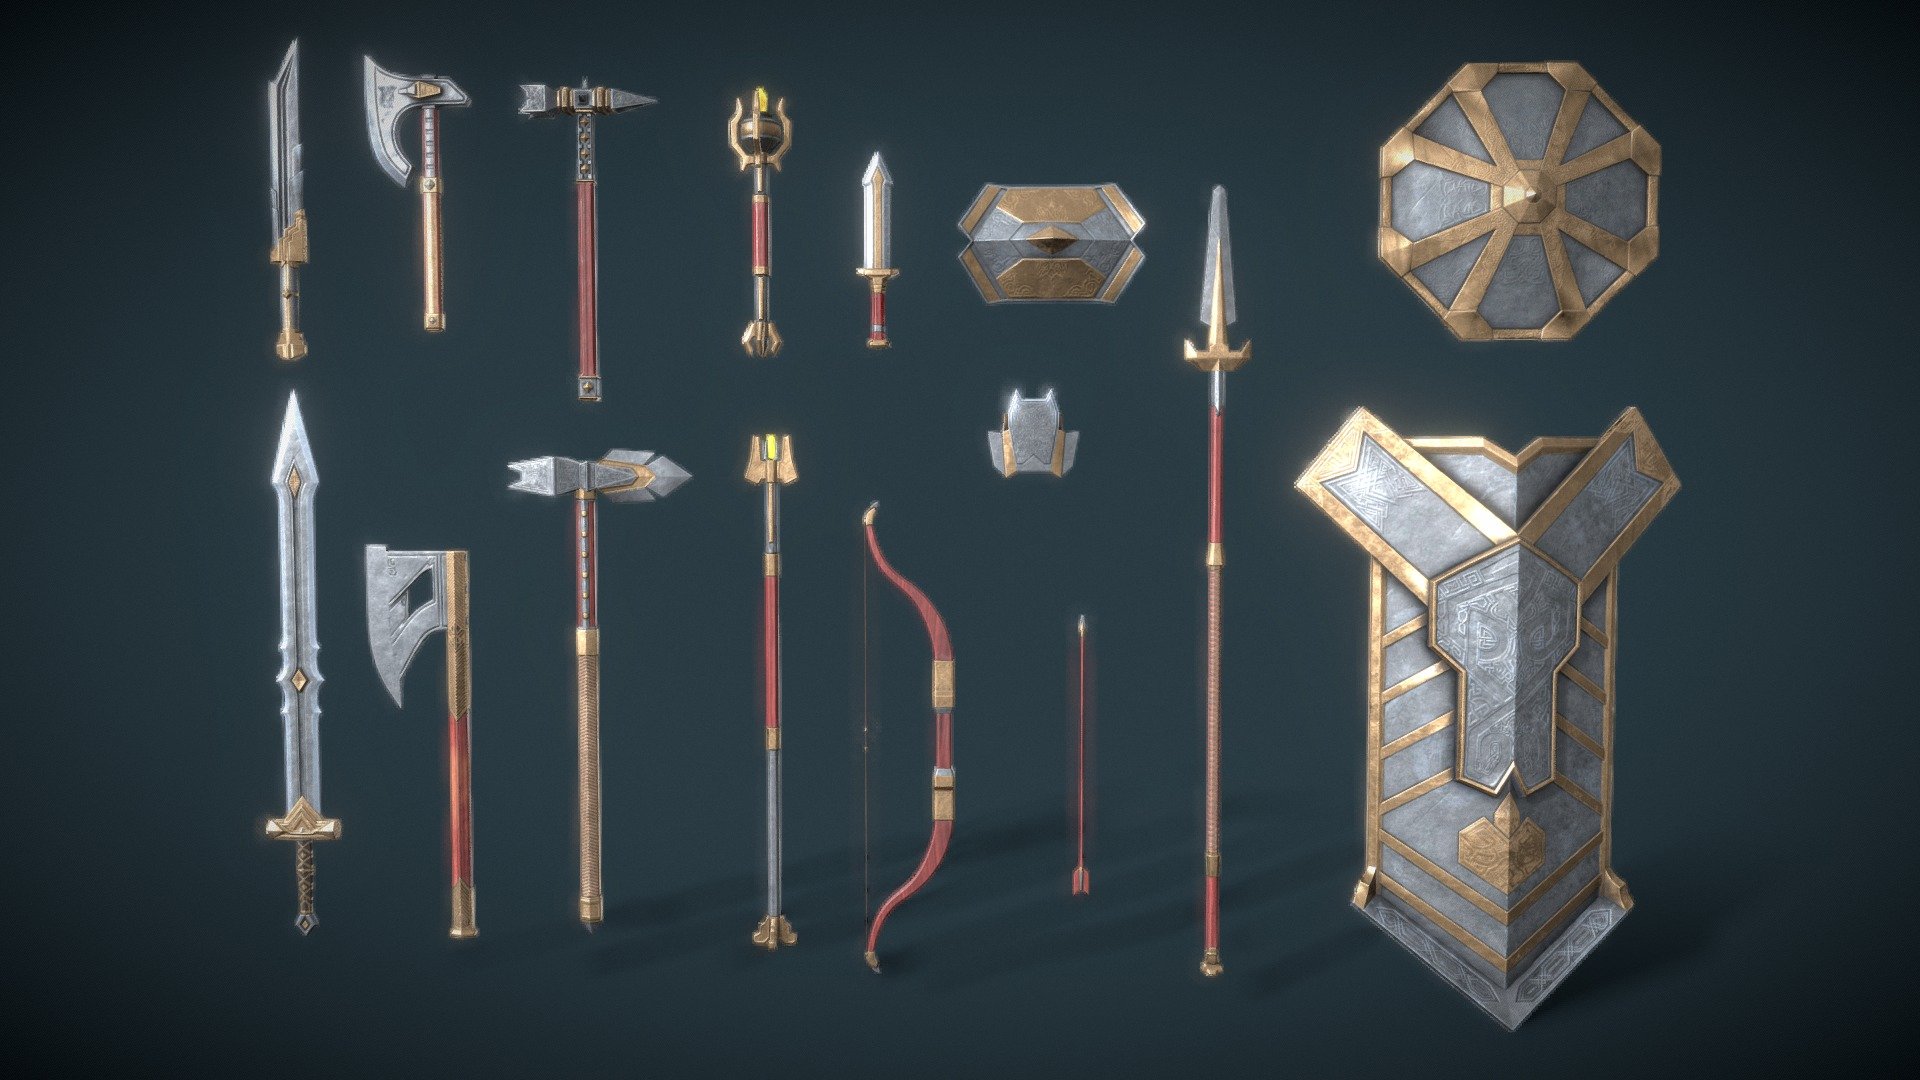 A set of fantasy Gnome weapons.

The set consists of sixteen unique objects.

PBR textures have a resolution of 2048x2048.

Total polygons: 25322 triangles; 13082 vertices.

1) Sword (one-handed) - 984 tris

2) Sword (two-handed) - 2168 tris

3) Mace (one-handed) - 2148 tris

4) Mace (two-handed) - 1462 tris

5) Ax (one-handed) - 1256 tris

6) Ax (two-handed) - 510 tris

7) Lance - 1464 tris

8) Dagger - 736 tris

9) Brass knuckles - 1008 tris

10) Bow - 2184 tris

11) Staff - 2816 tris

12) Scepter - 3592 tris

13) Shield (small) - 608 tris

14) Shield (medium) - 1372 tris

15) Shield (great) - 2482 tris

16) Arrow - 532 tris

Archives with textures contain:

PNG textures for blender - base color, metallic, normal, roughness, opacity, glow

Texturing Unity (Metallic Smoothness) - AlbedoTransparency, MetallicSmoothness, Normal, Emission

Texturing Unreal Engine - BaseColor, Normal, OcclusionRoughnessMetallic, Emissive - Fantasy Set Of Gnome Weapons - 3D model by zilbeerman 3d model